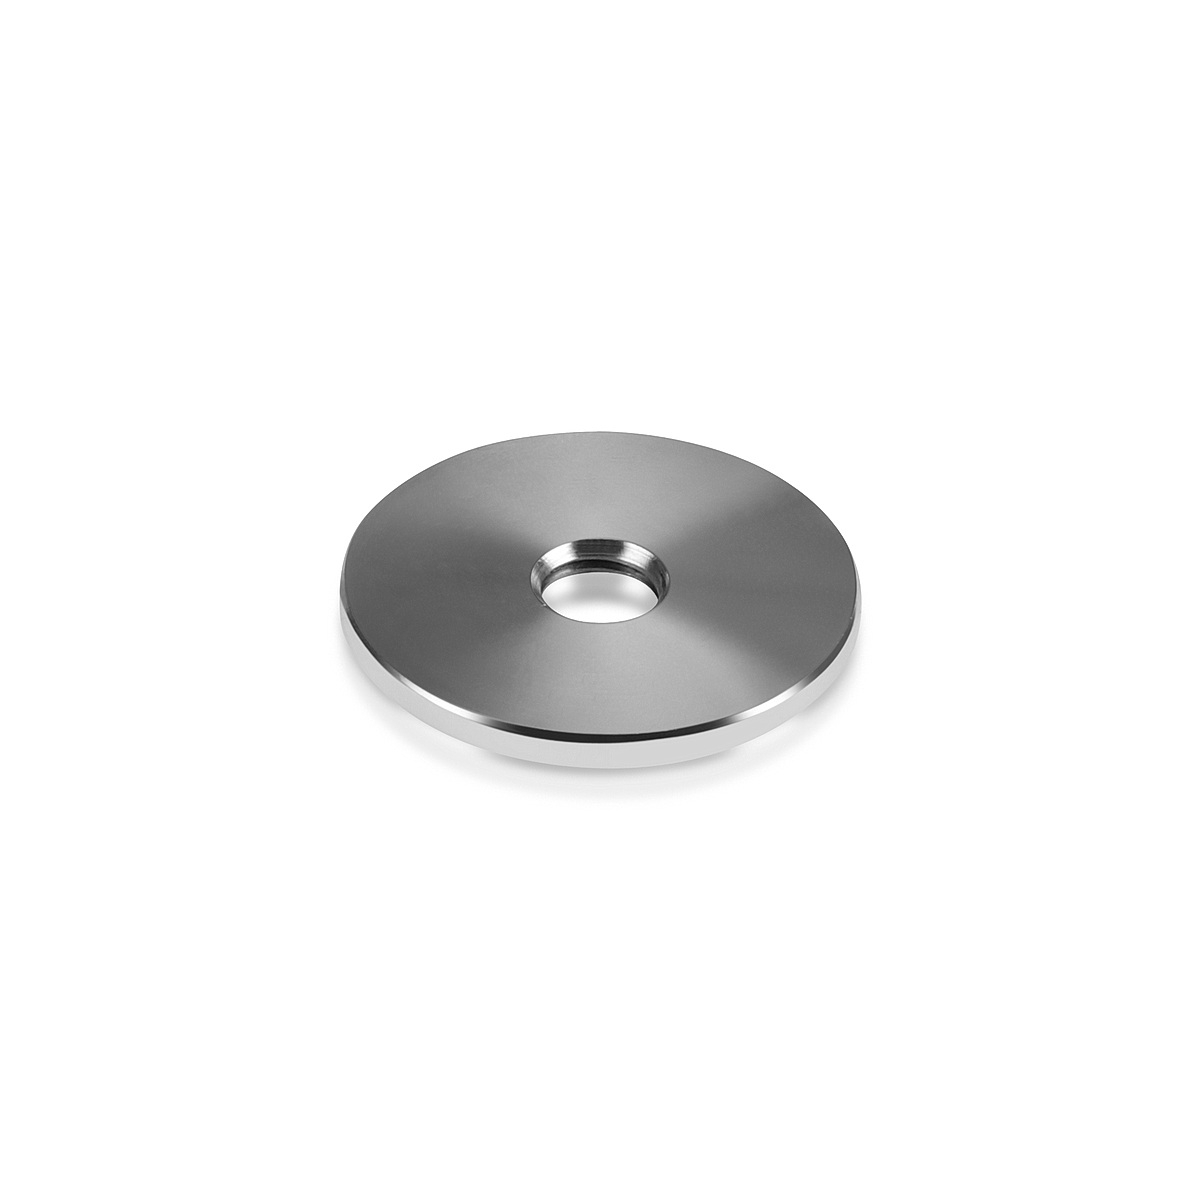 3/8-16 Threaded Barrels Diameter: 1 1/2'', Length: 1/8'',  Stainless Steel 304, Polished [Required Material Hole Size: 3/8'' ]